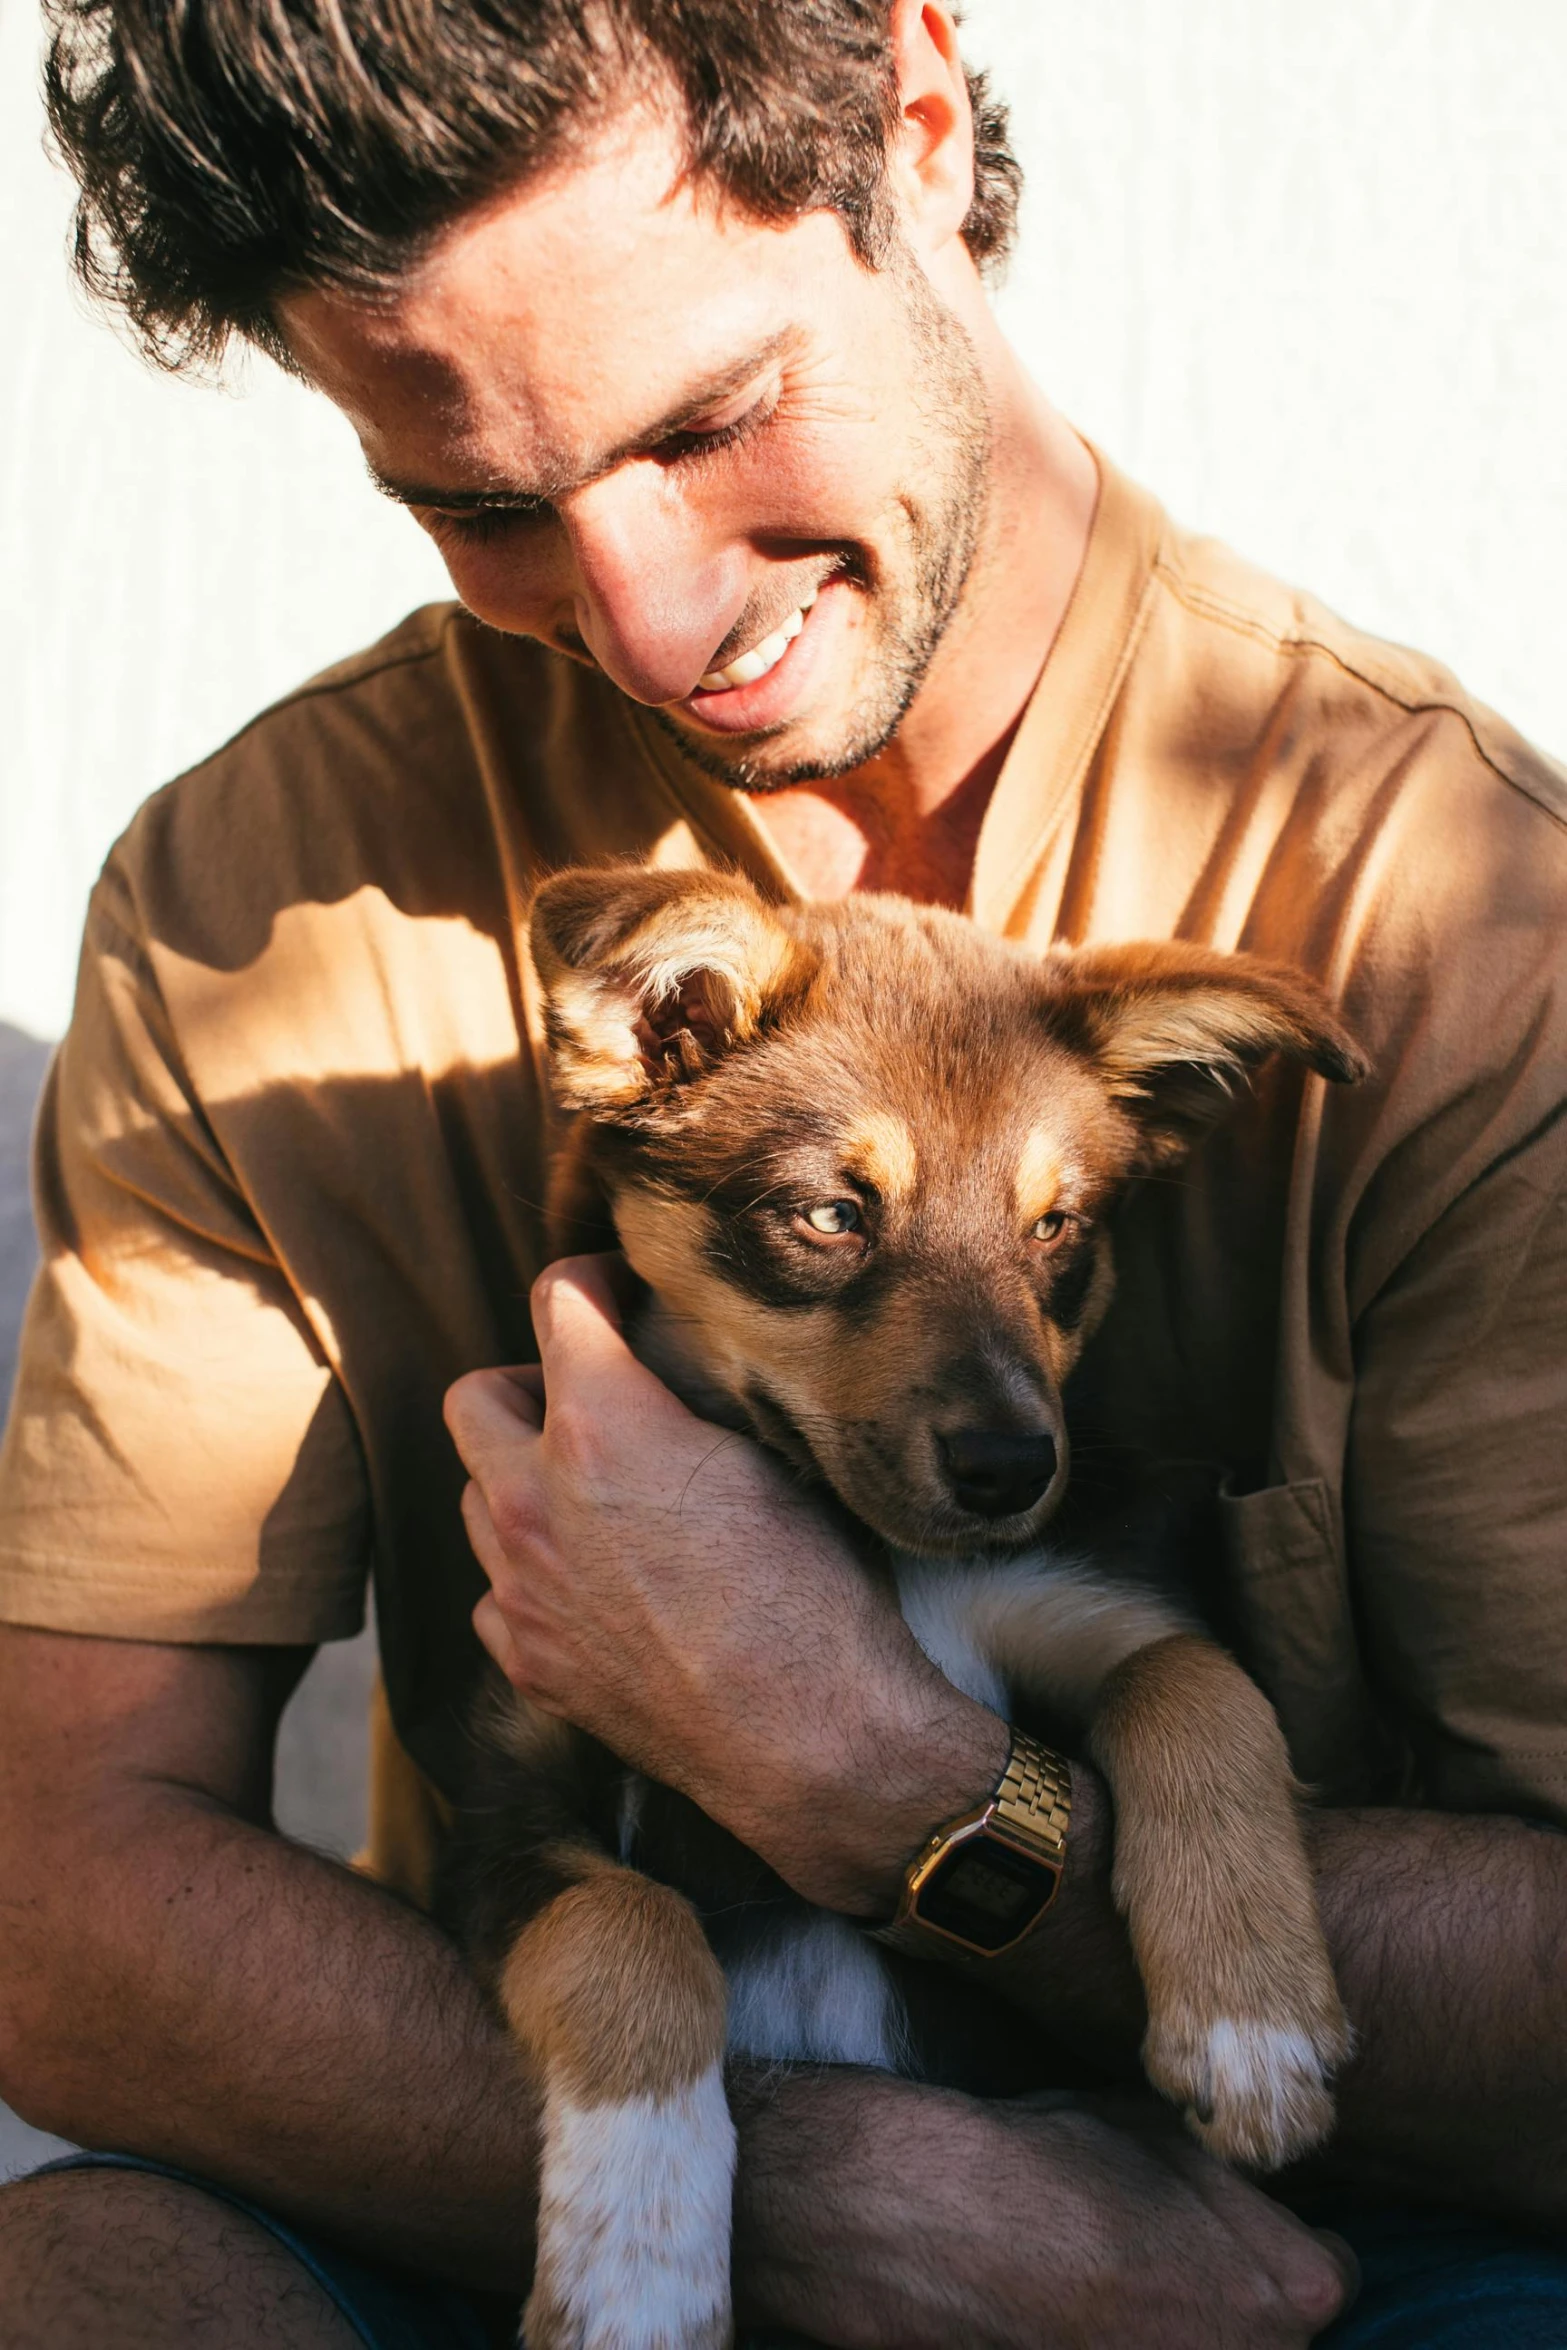 a man sitting on a couch holding a small dog, ruggedly handsome ranger, hugging and cradling, profile image, sunshine